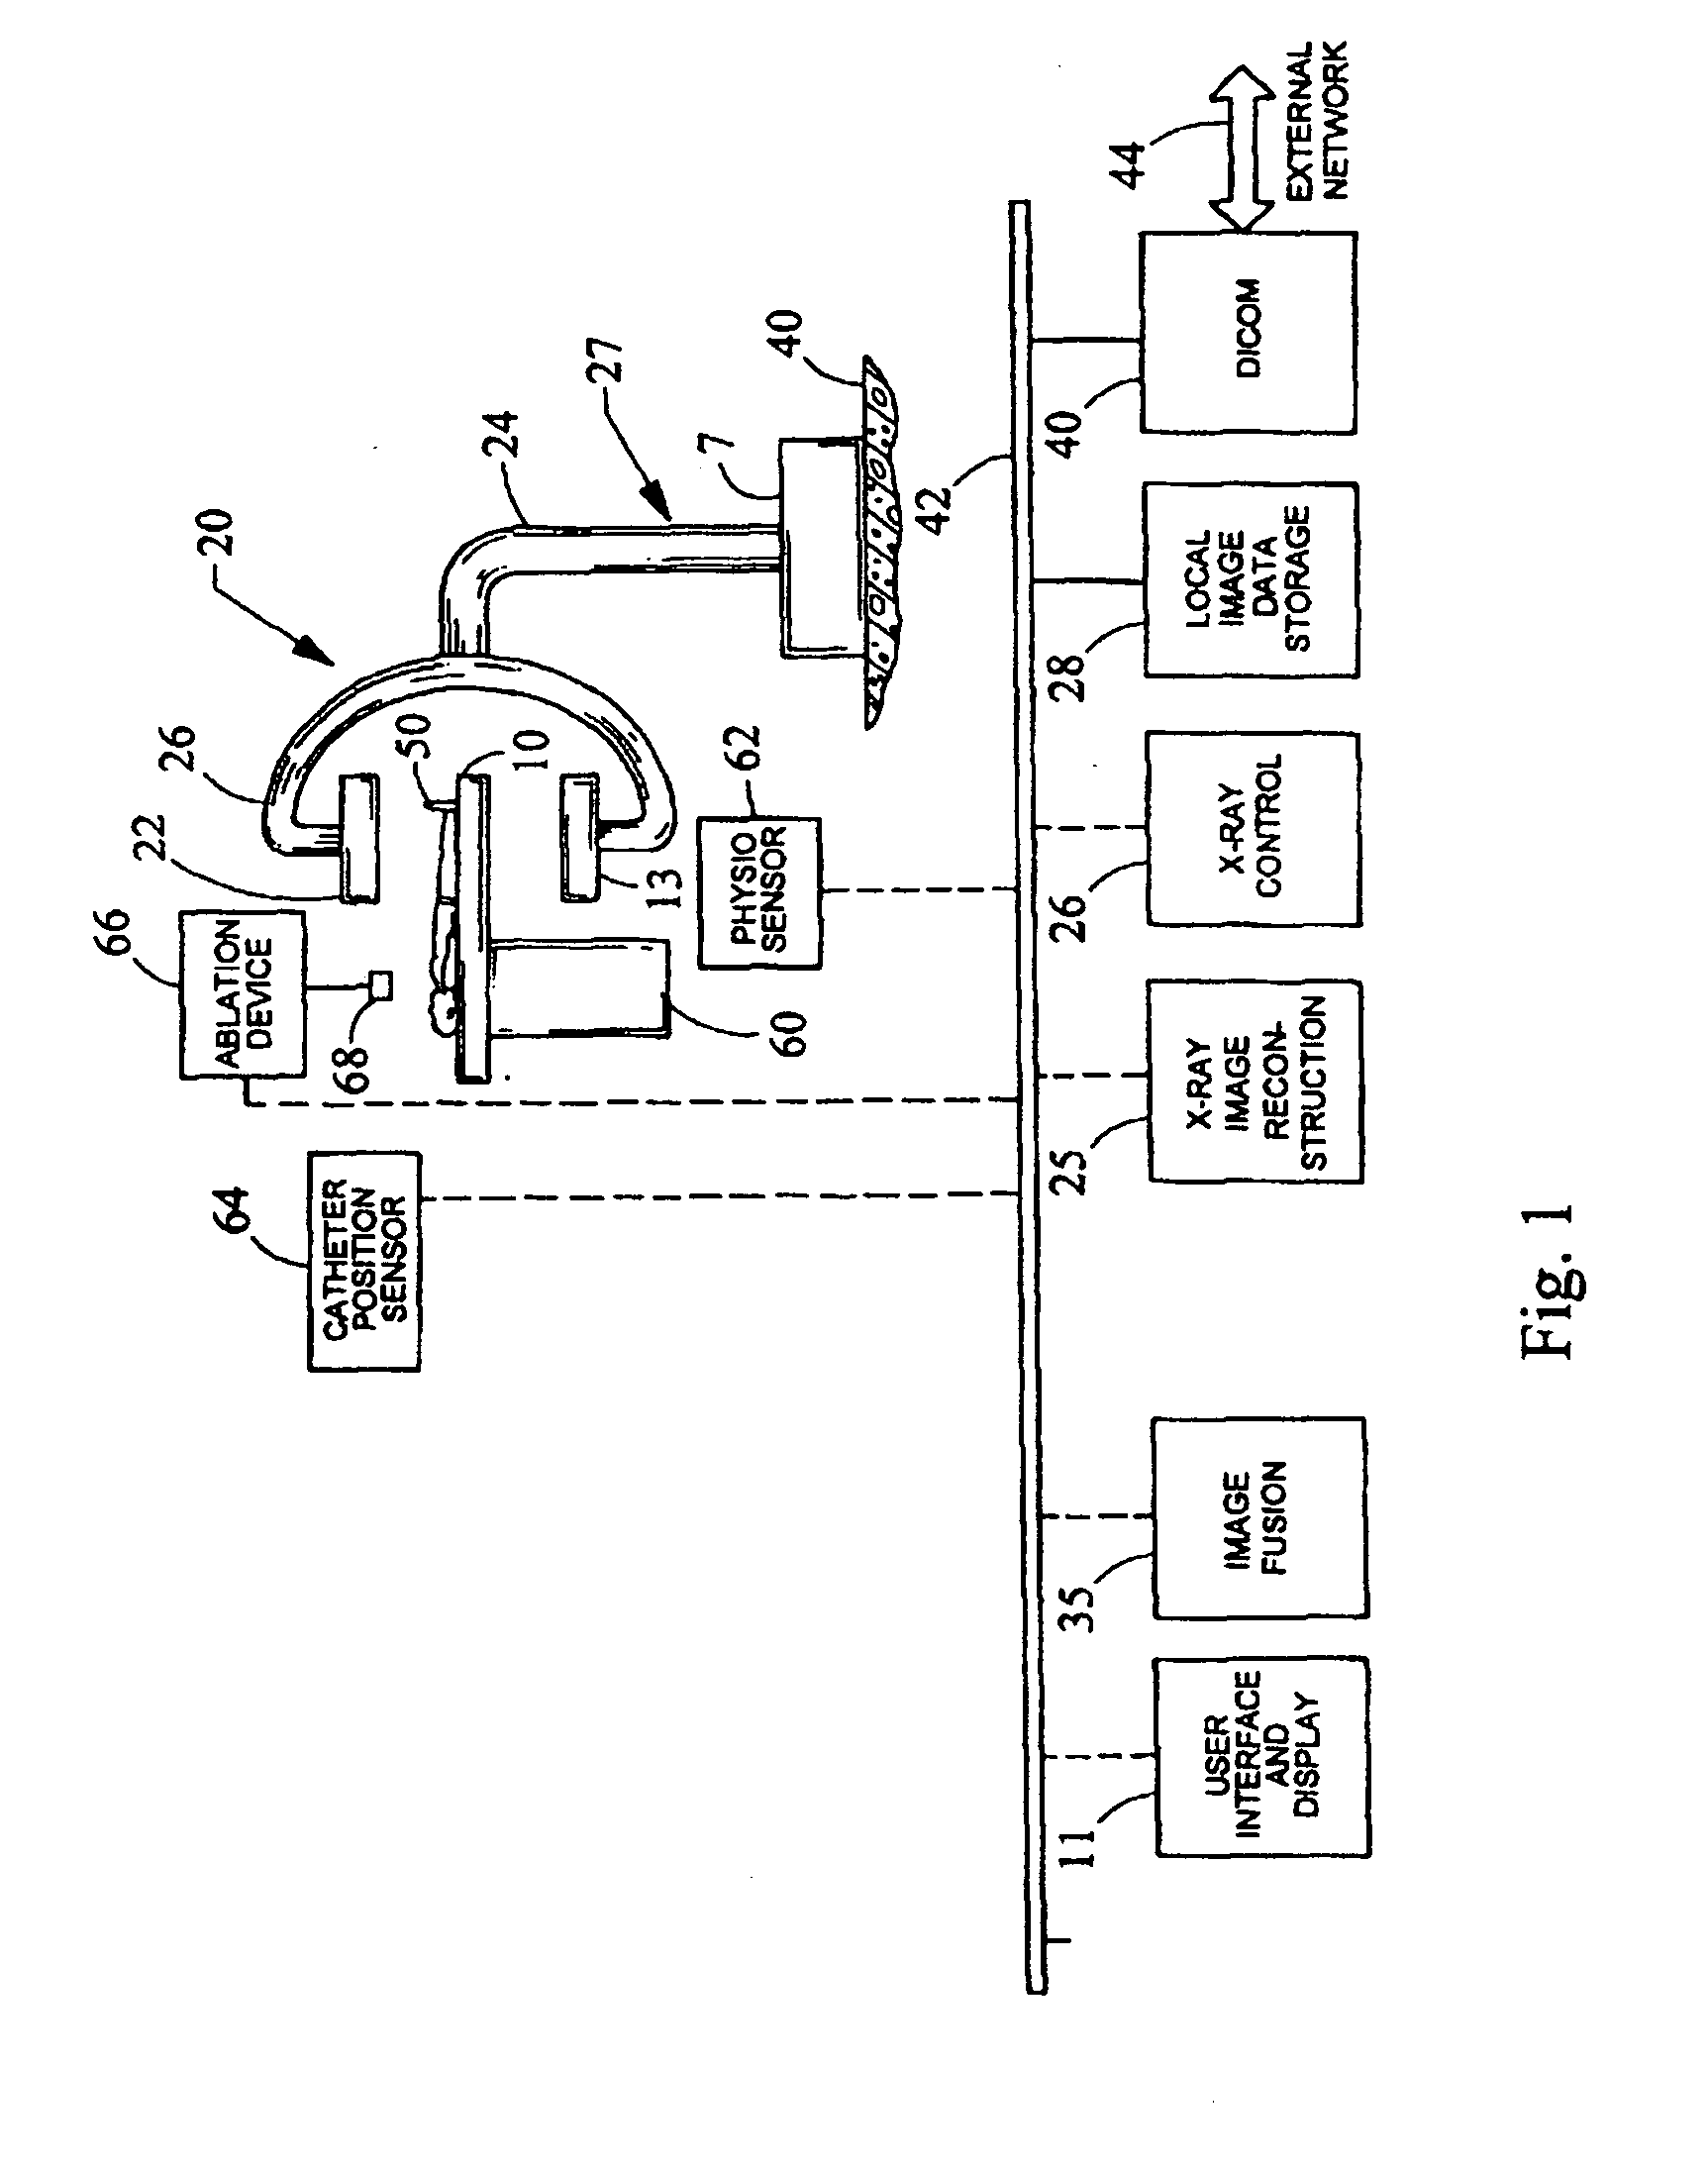 Method and system for performing ablation to treat ventricular tachycardia